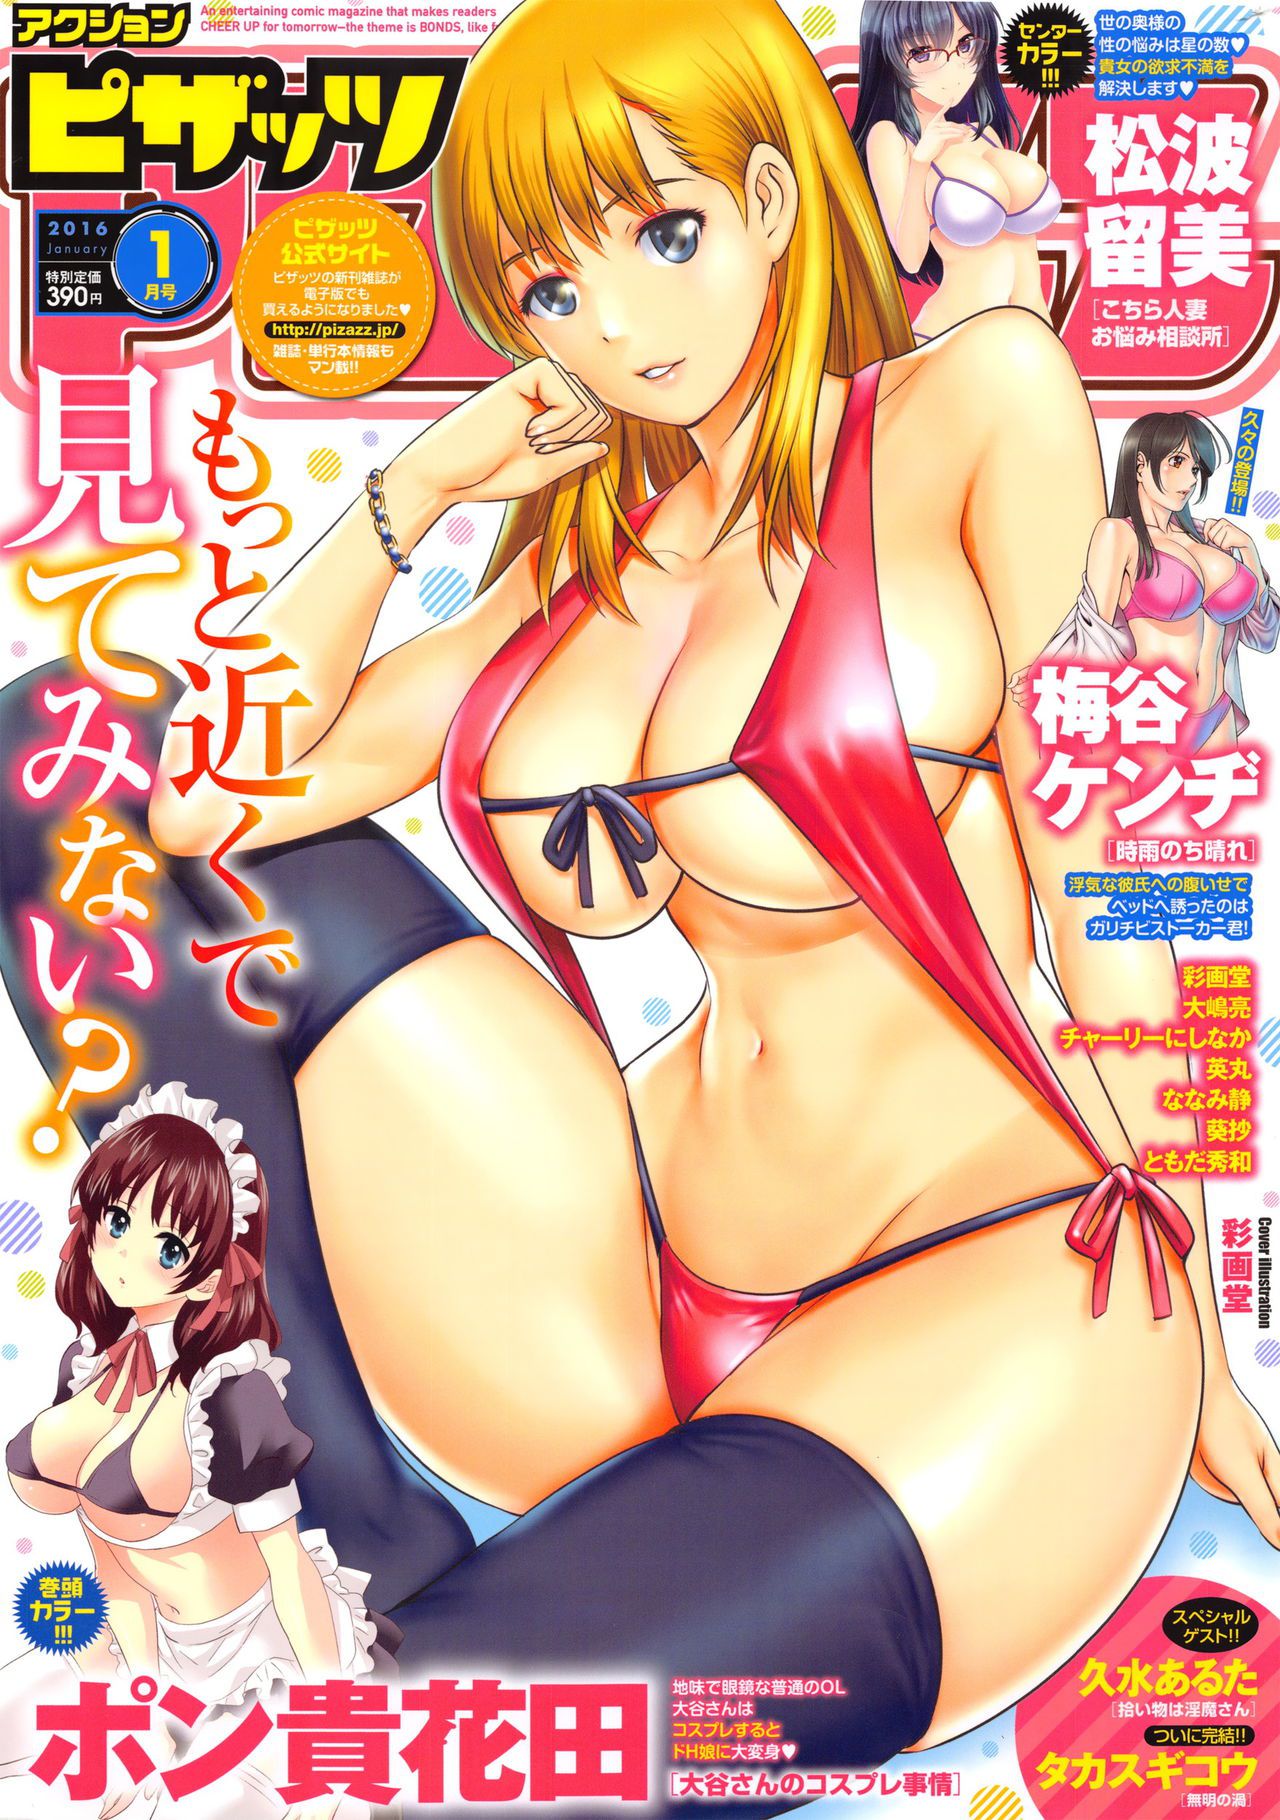 [Saigado] Cover Illustrations [彩画堂] Cover Illustrations 93